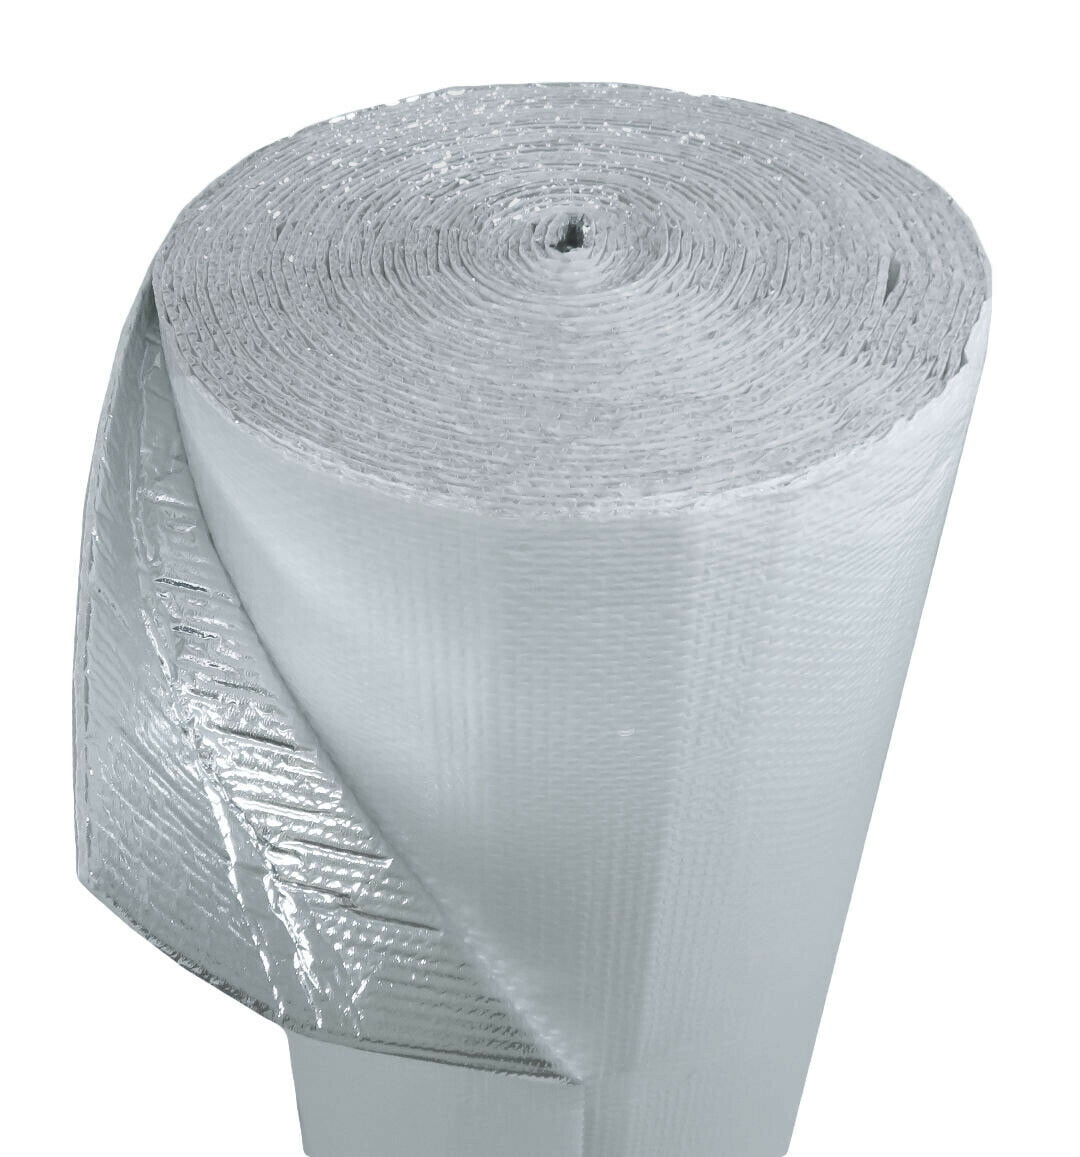 500 sqft Reflective Foam Core Perforated Attic Insulation 48x125 House Wrap 